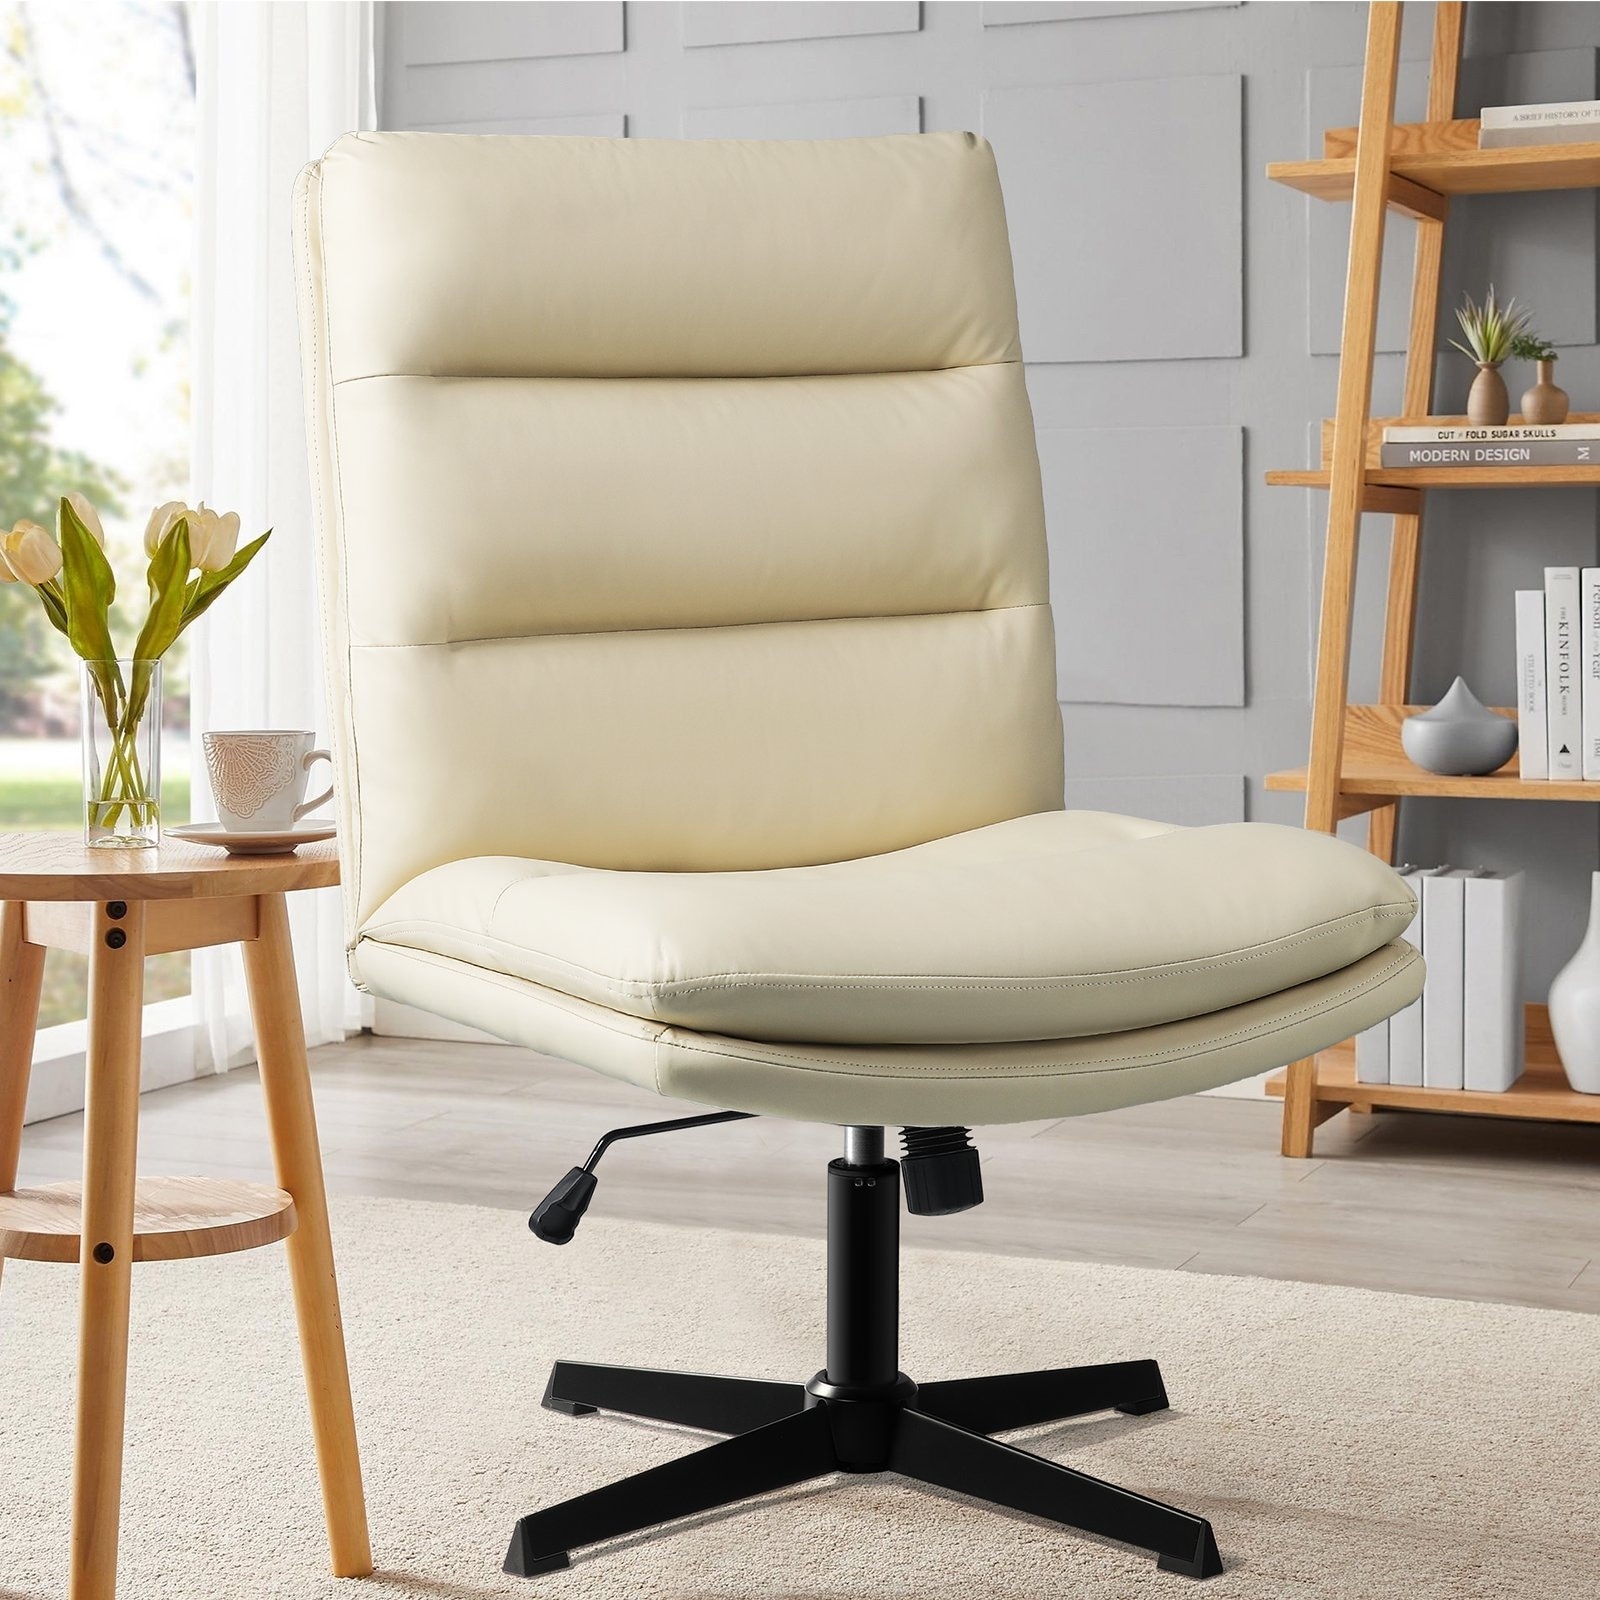 https://ak1.ostkcdn.com/images/products/is/images/direct/0f85c8a40e7ad156cec52b2fd52da1a528253165/Bossin-Armless-Office-Desk-Chair-No-Wheels%2CPU-Leather-Criss-Cross-Legged-Chair-for-Home-Office%2C-High-Back-Computer-Desk-Chair.jpg